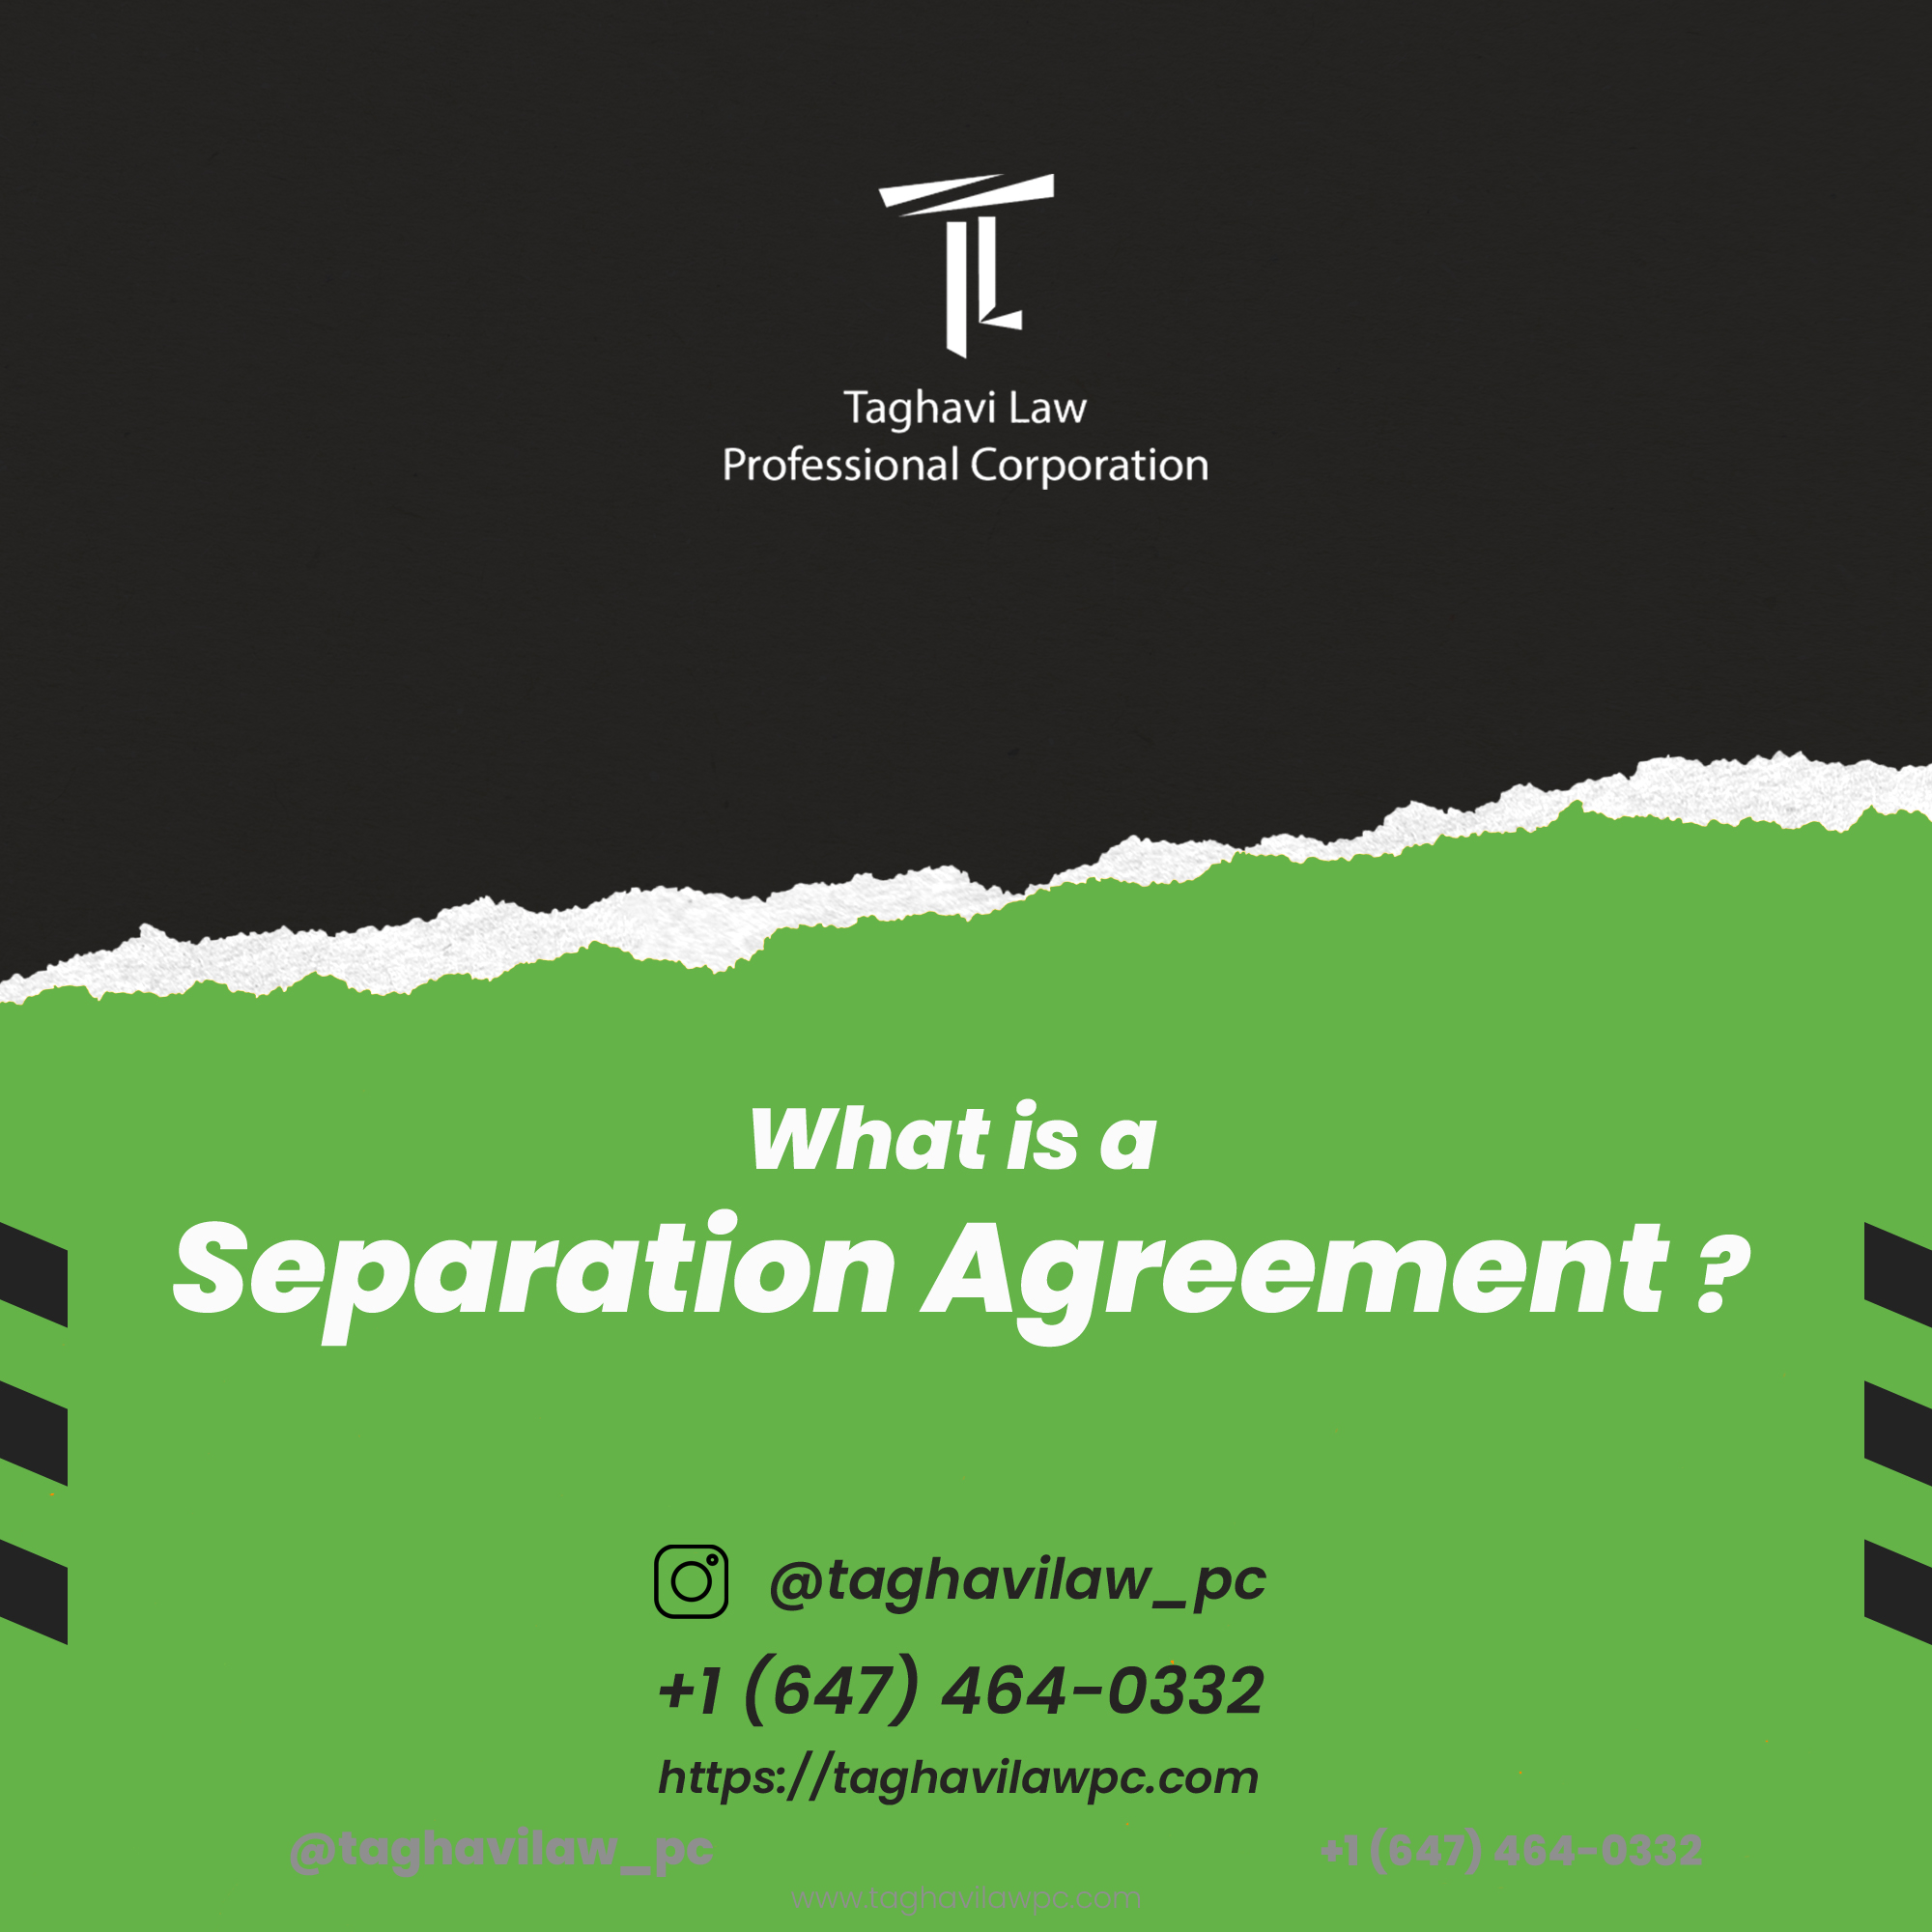 Separation agreements